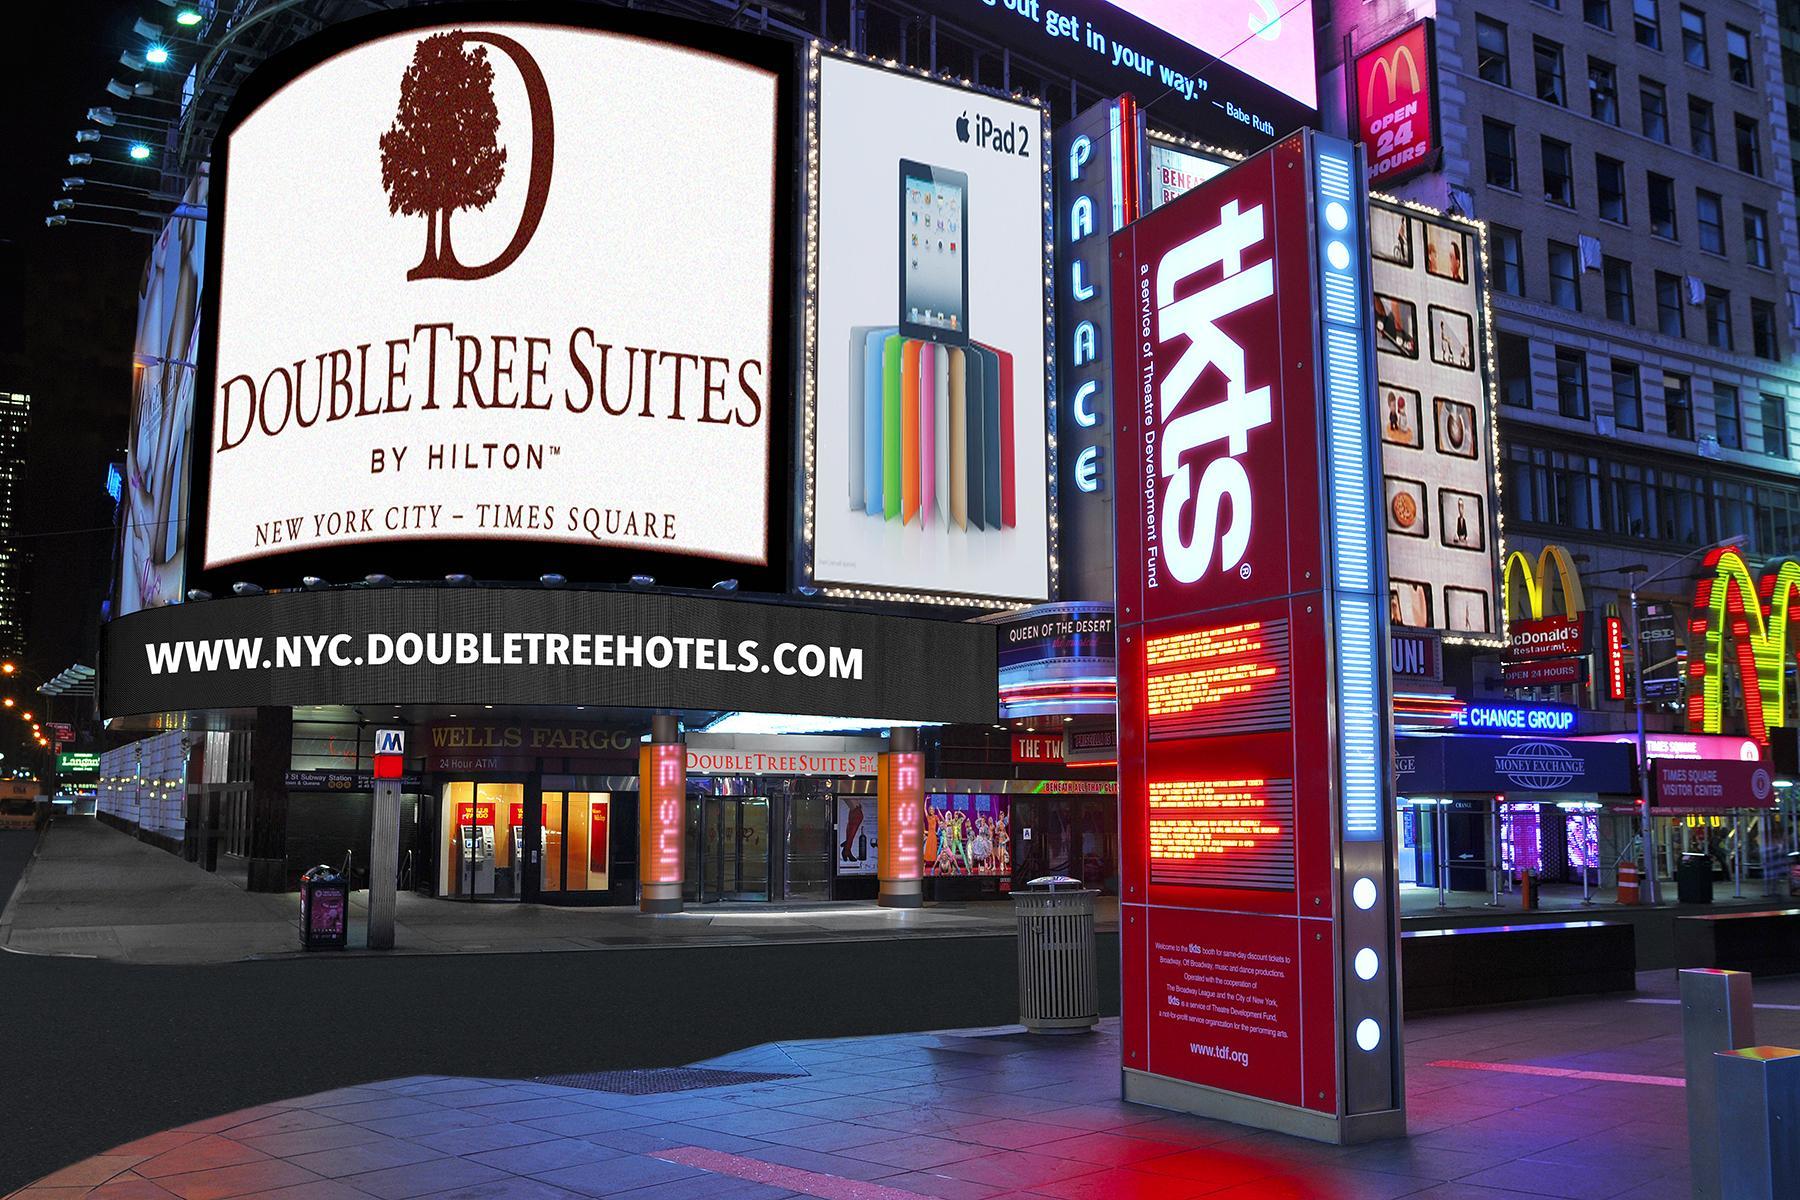 Photo of DoubleTree Suites by Hilton Hotel New York City - Times Square, New York, NY